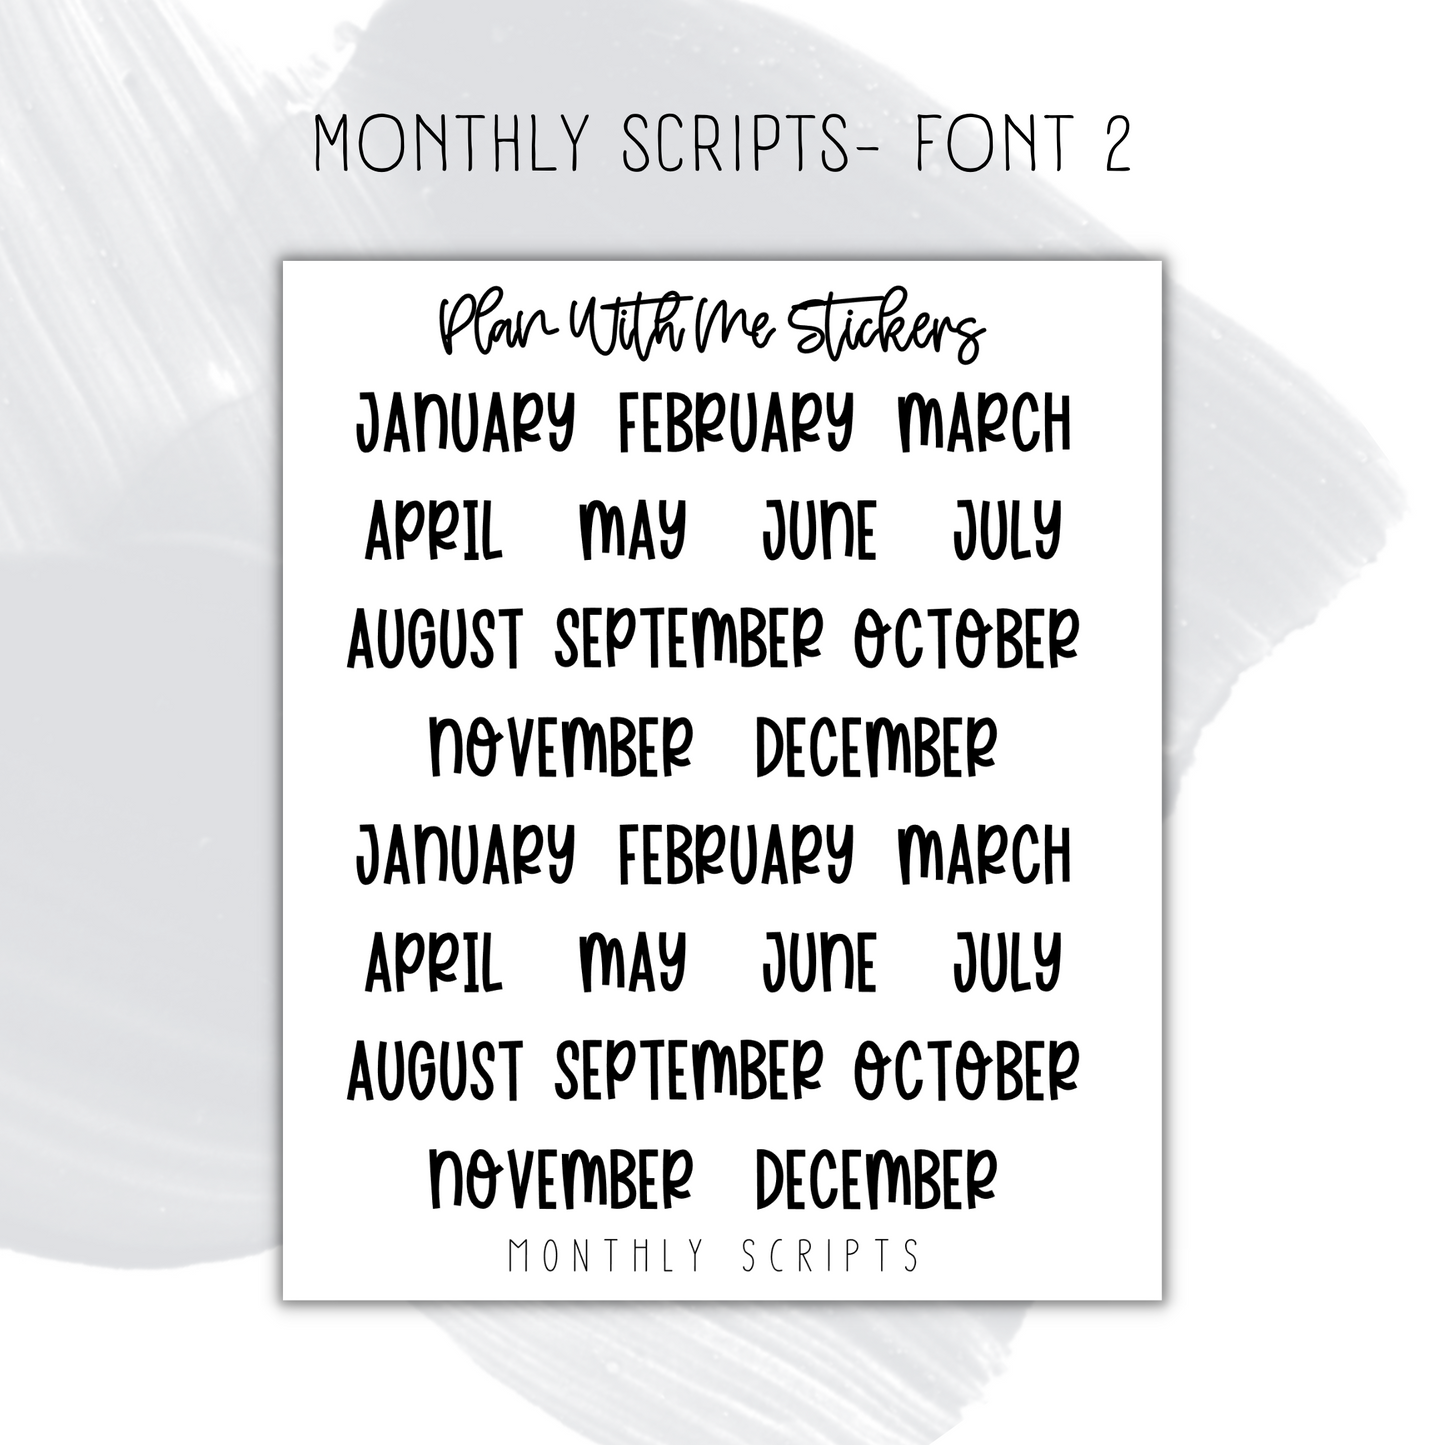 Monthly Scripts- Font 2